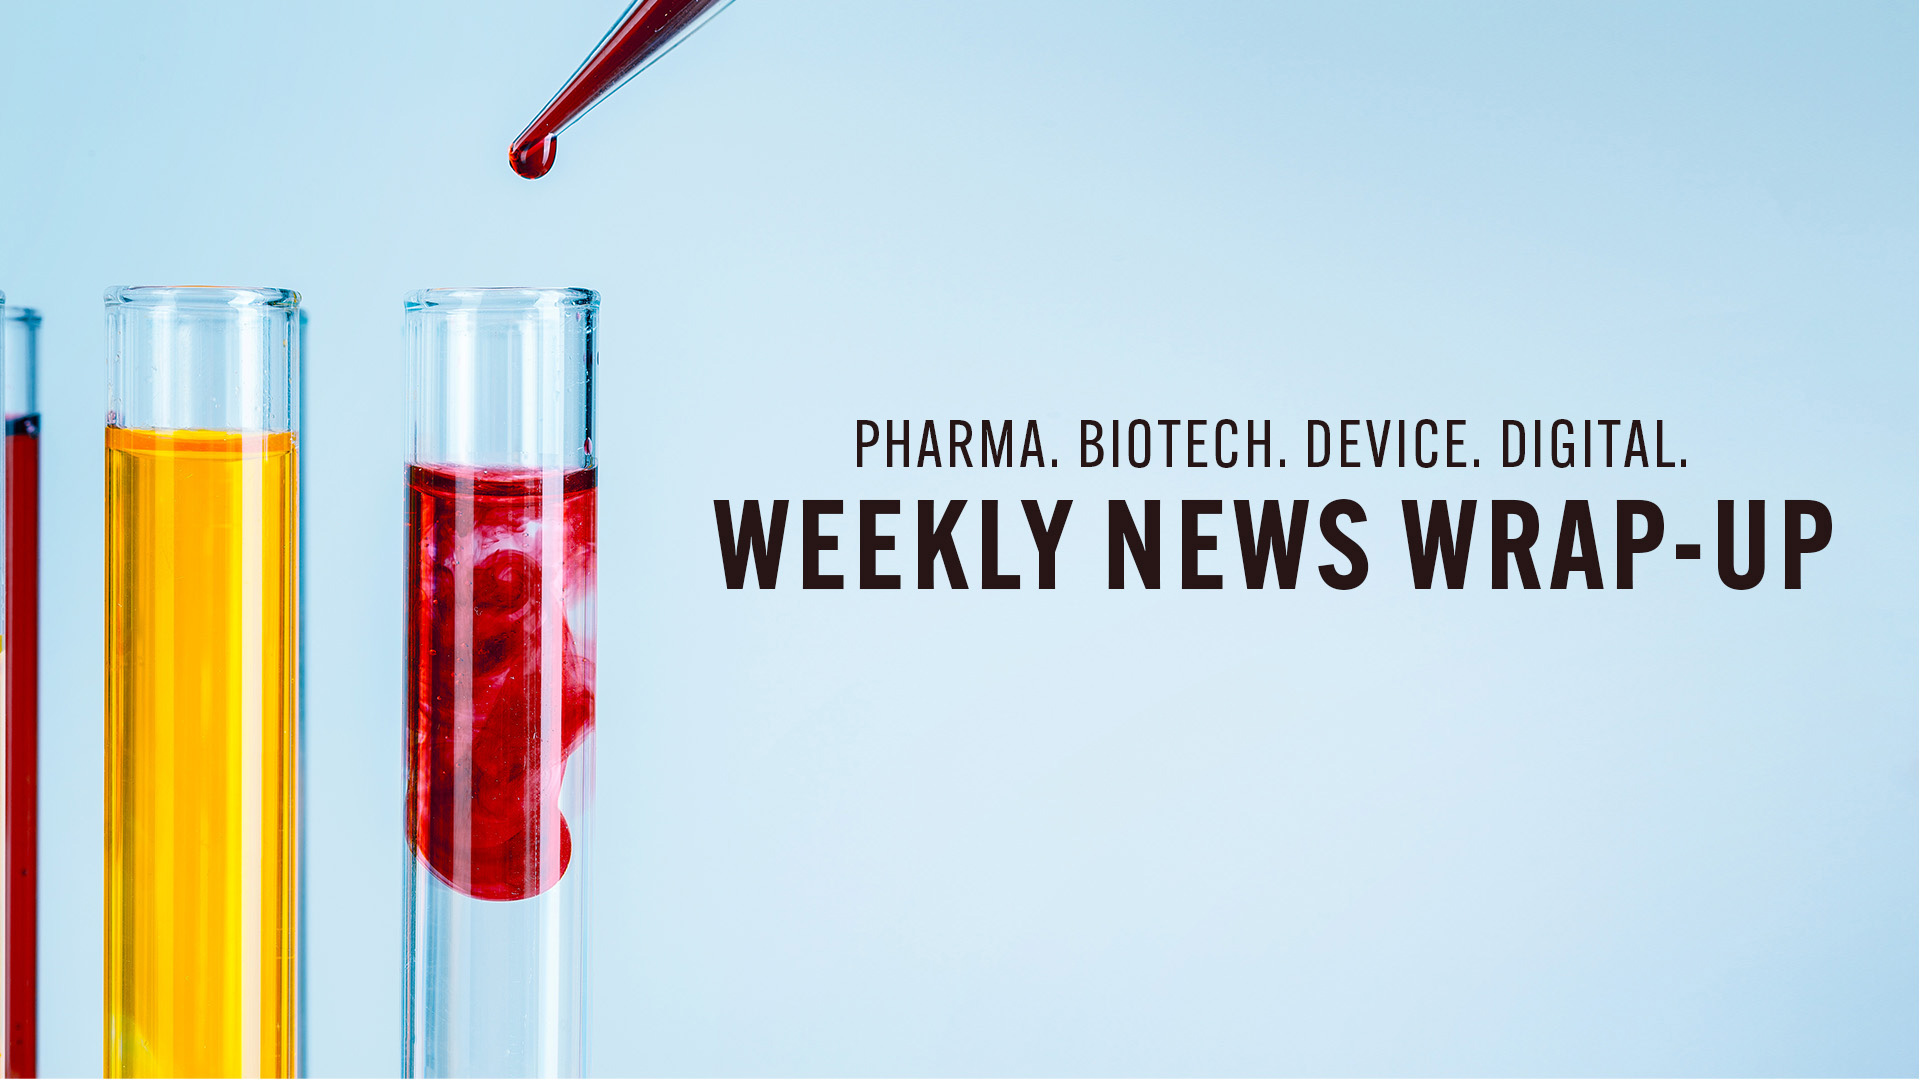 Healthcare Industry News Weekly Wrap-Up: December 2, 2022